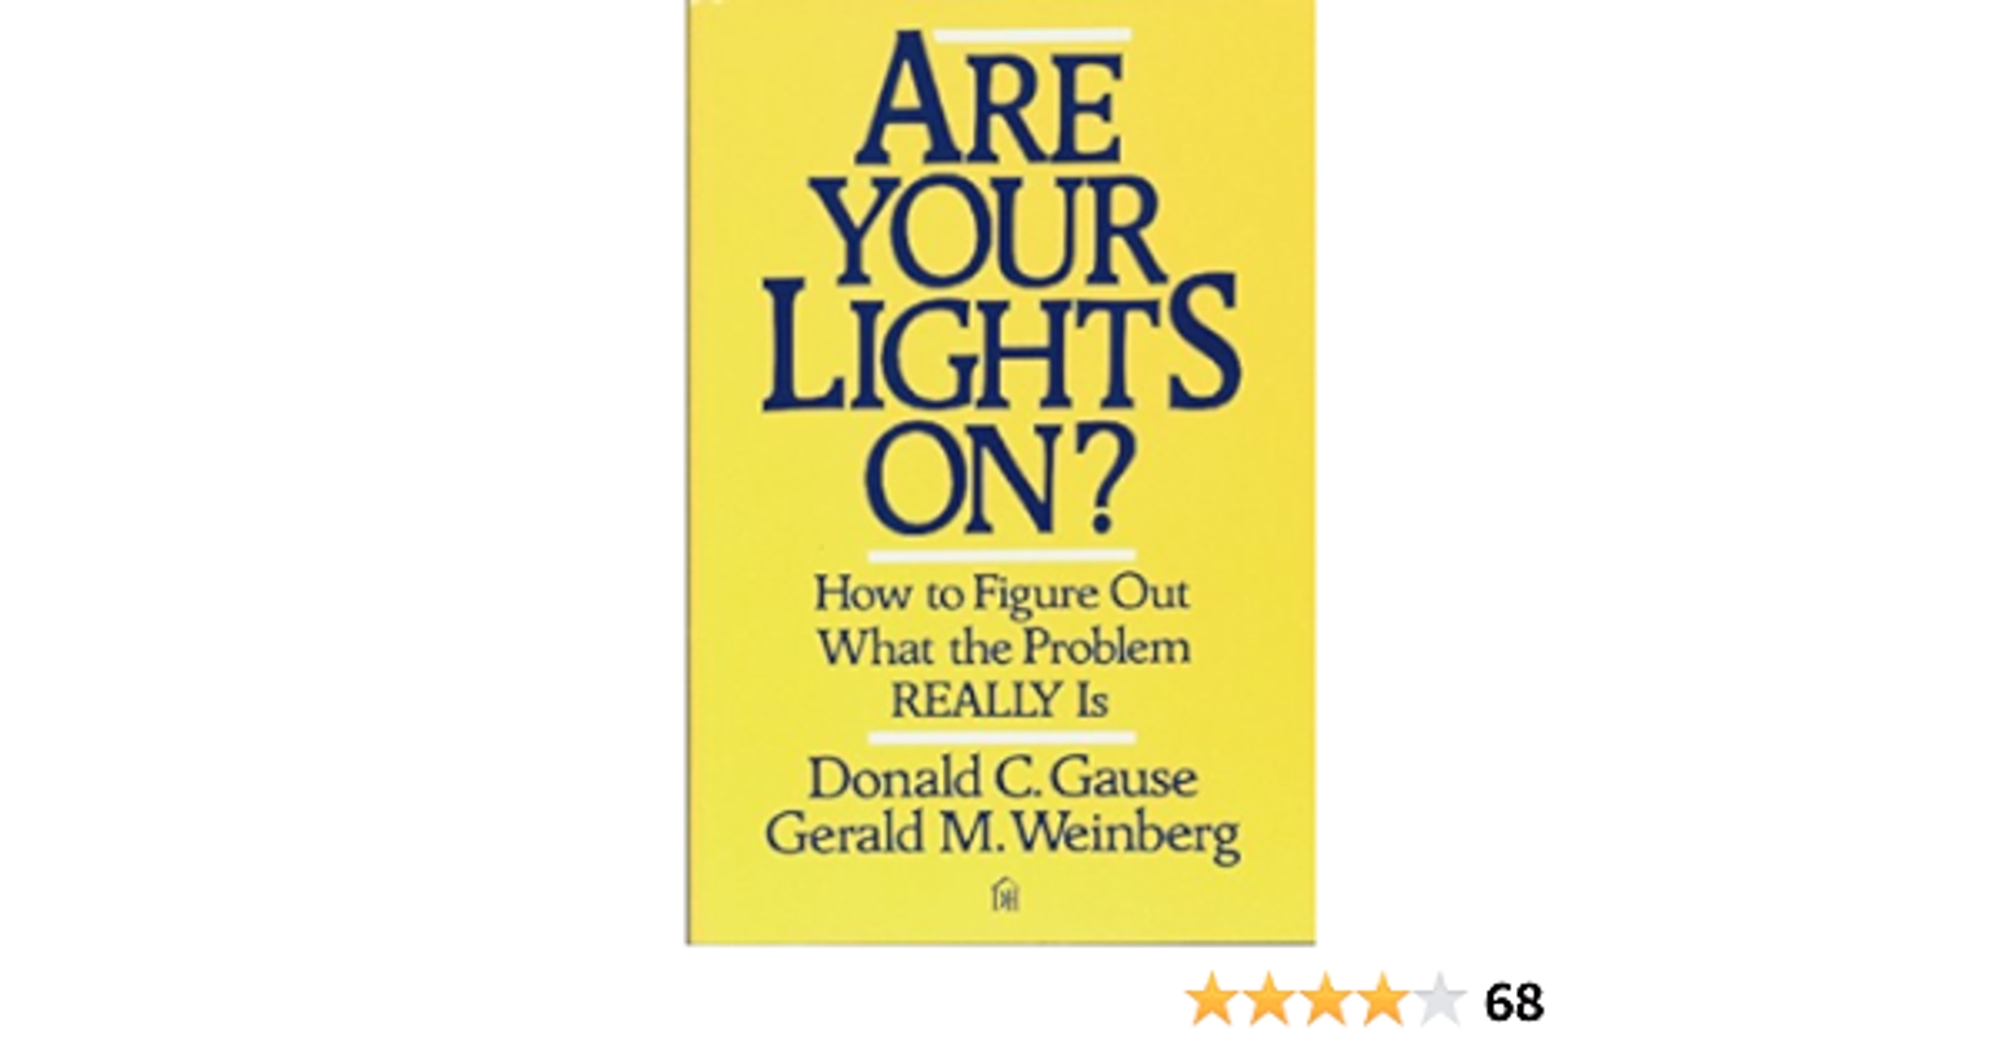 Are Your Lights On?: How to Figure Out What the Problem Really Is